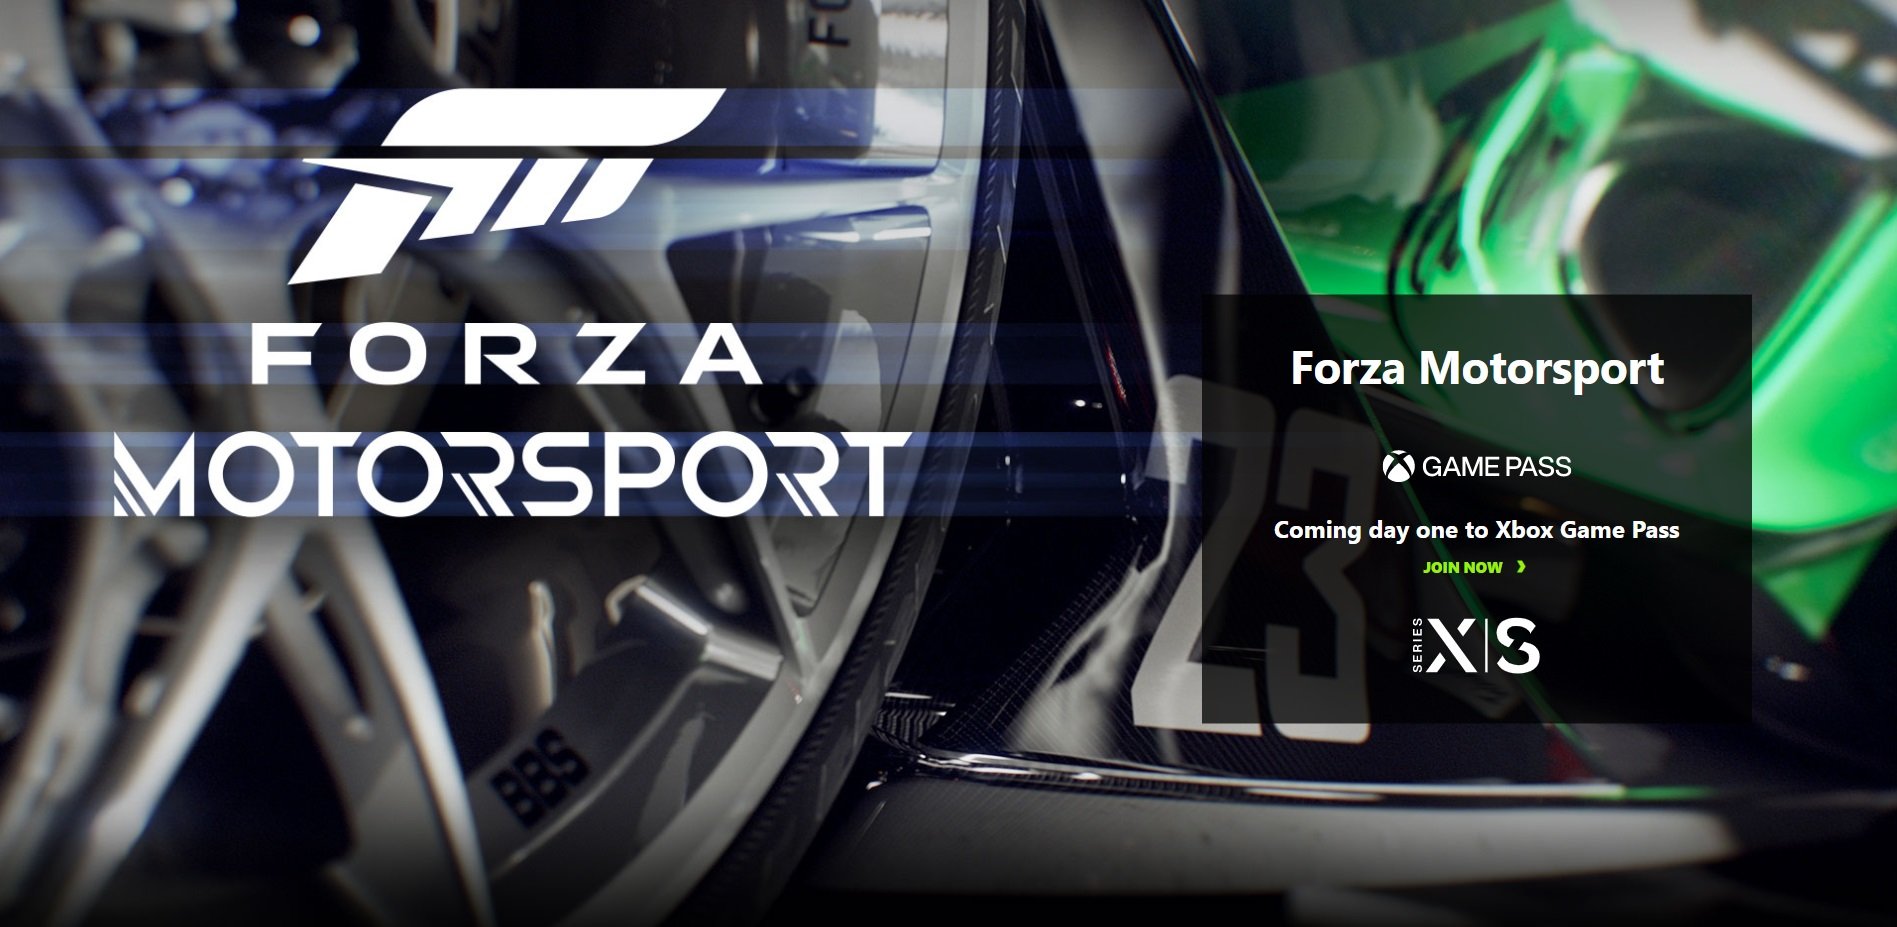 The first round of Forza Motorsport 8 playtest invites has been sent out